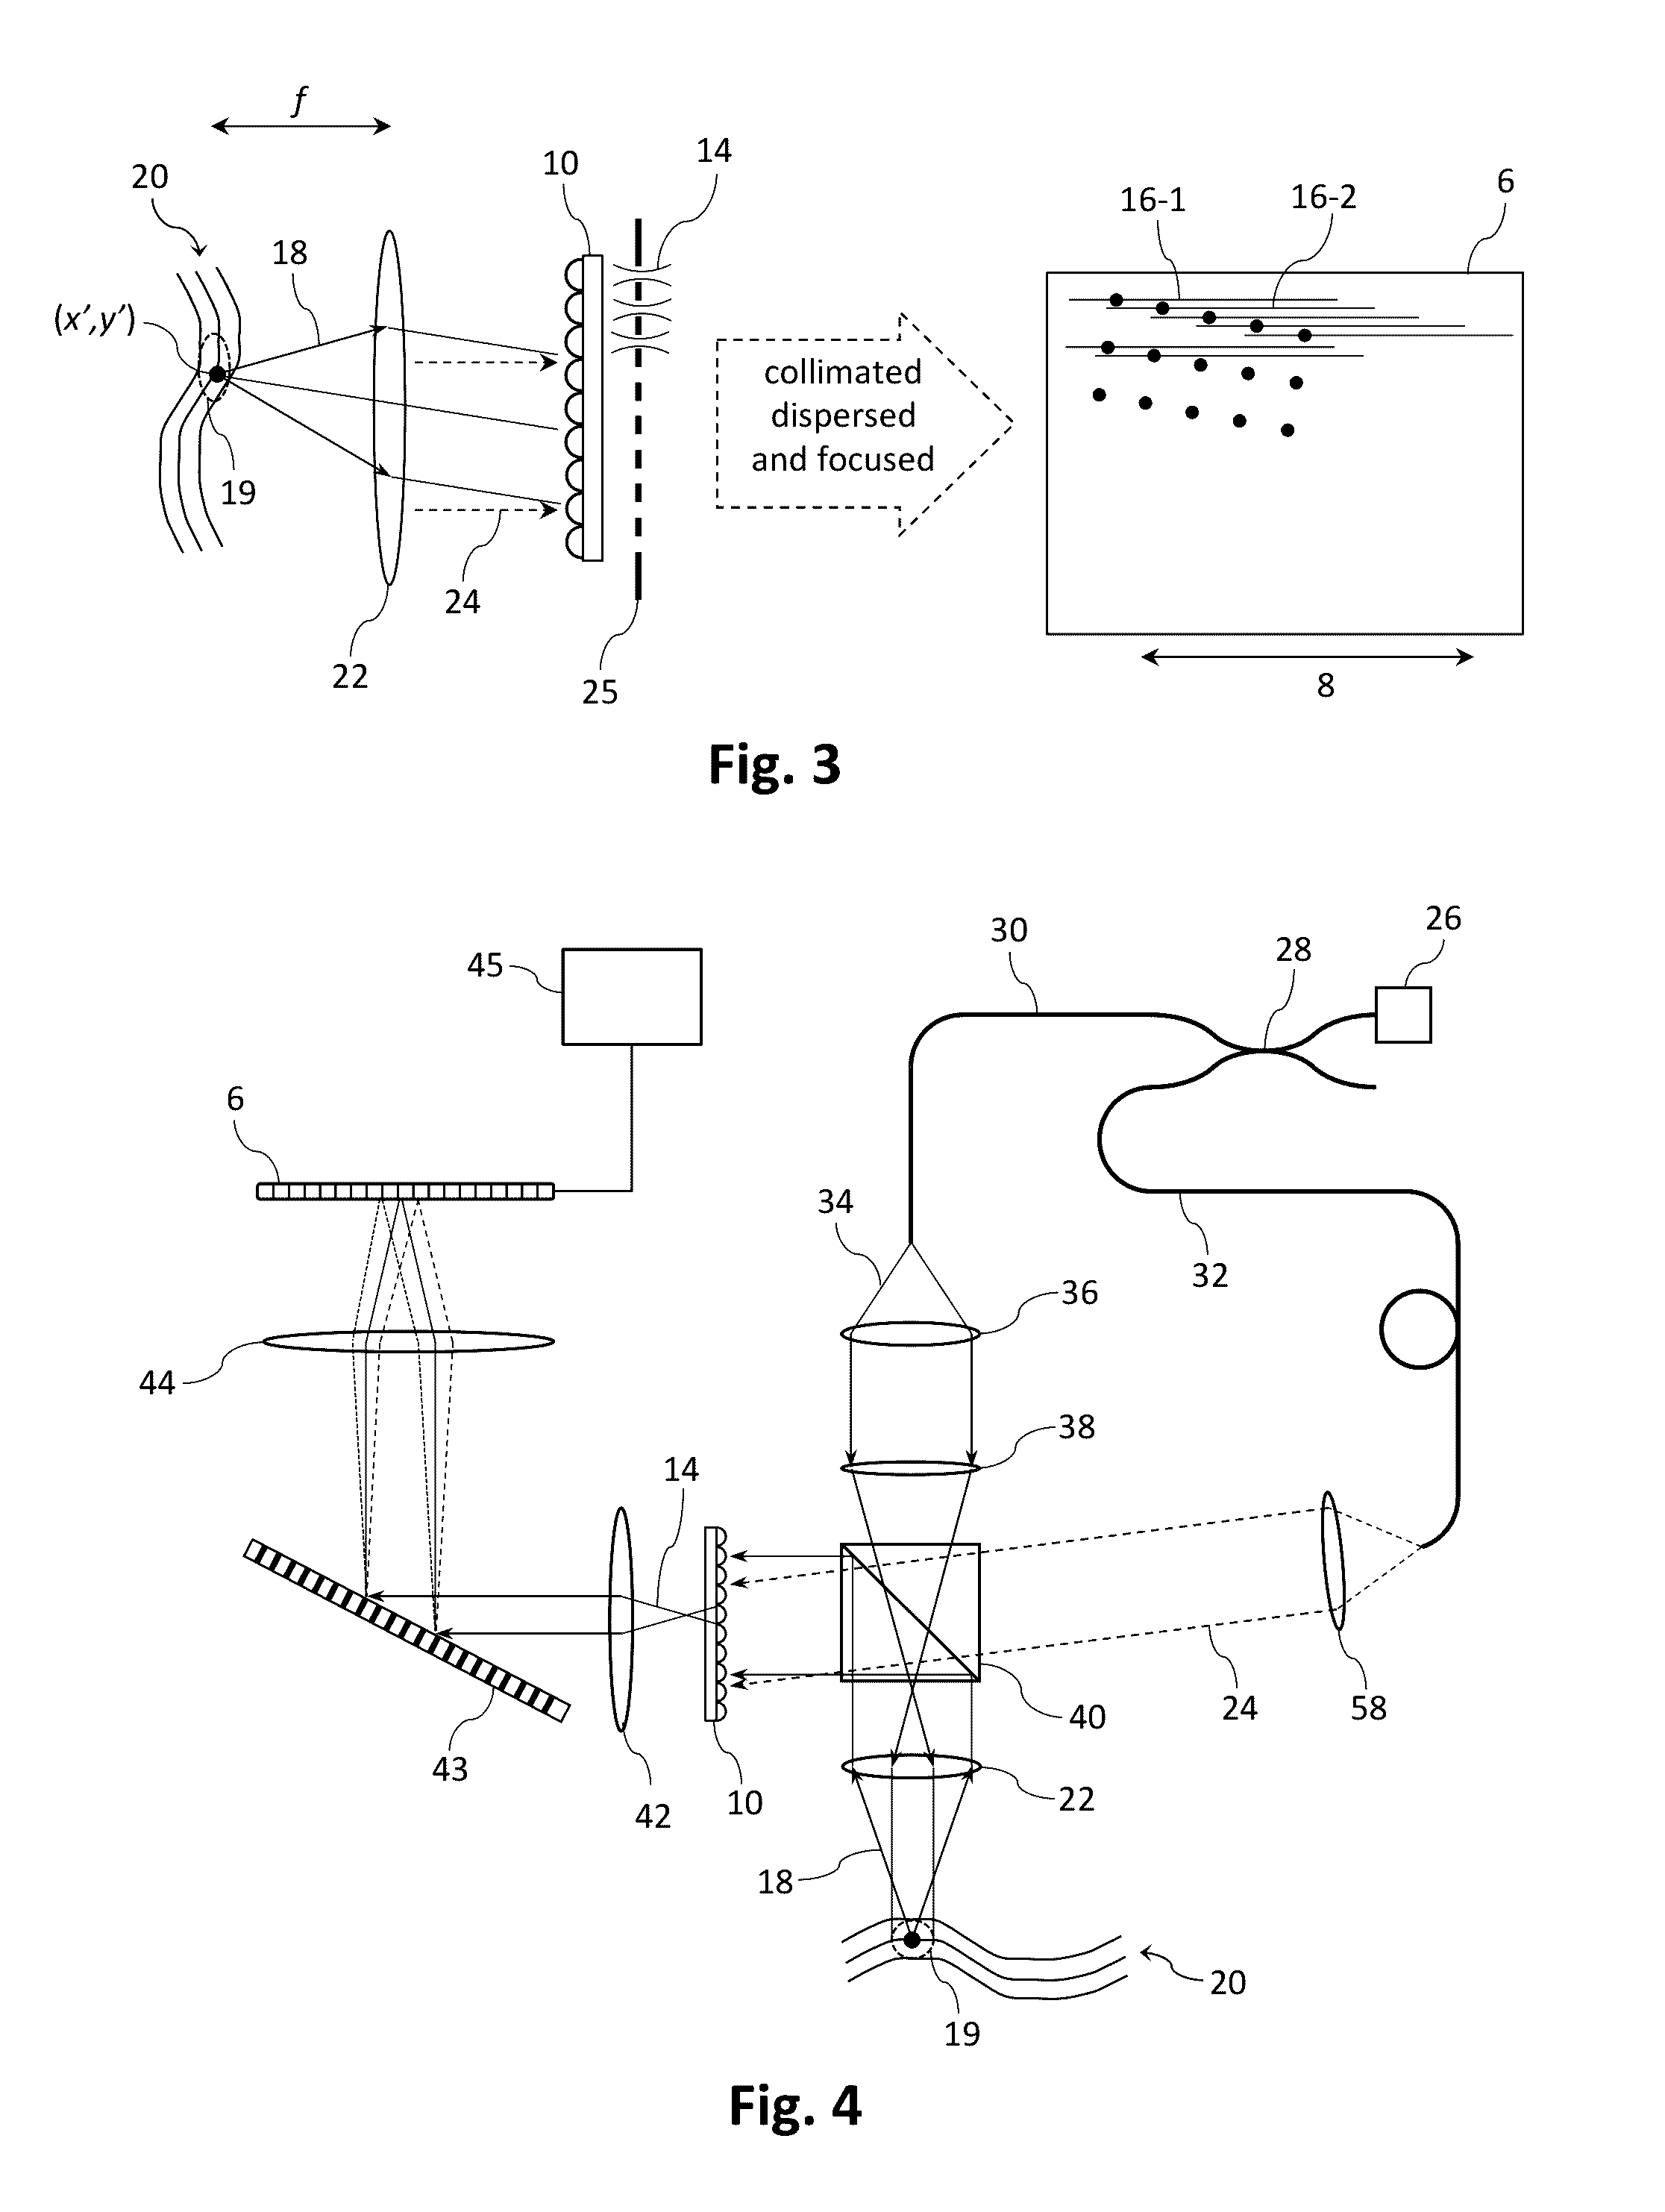 High resolution 3-d spectral domain optical imaging apparatus and method